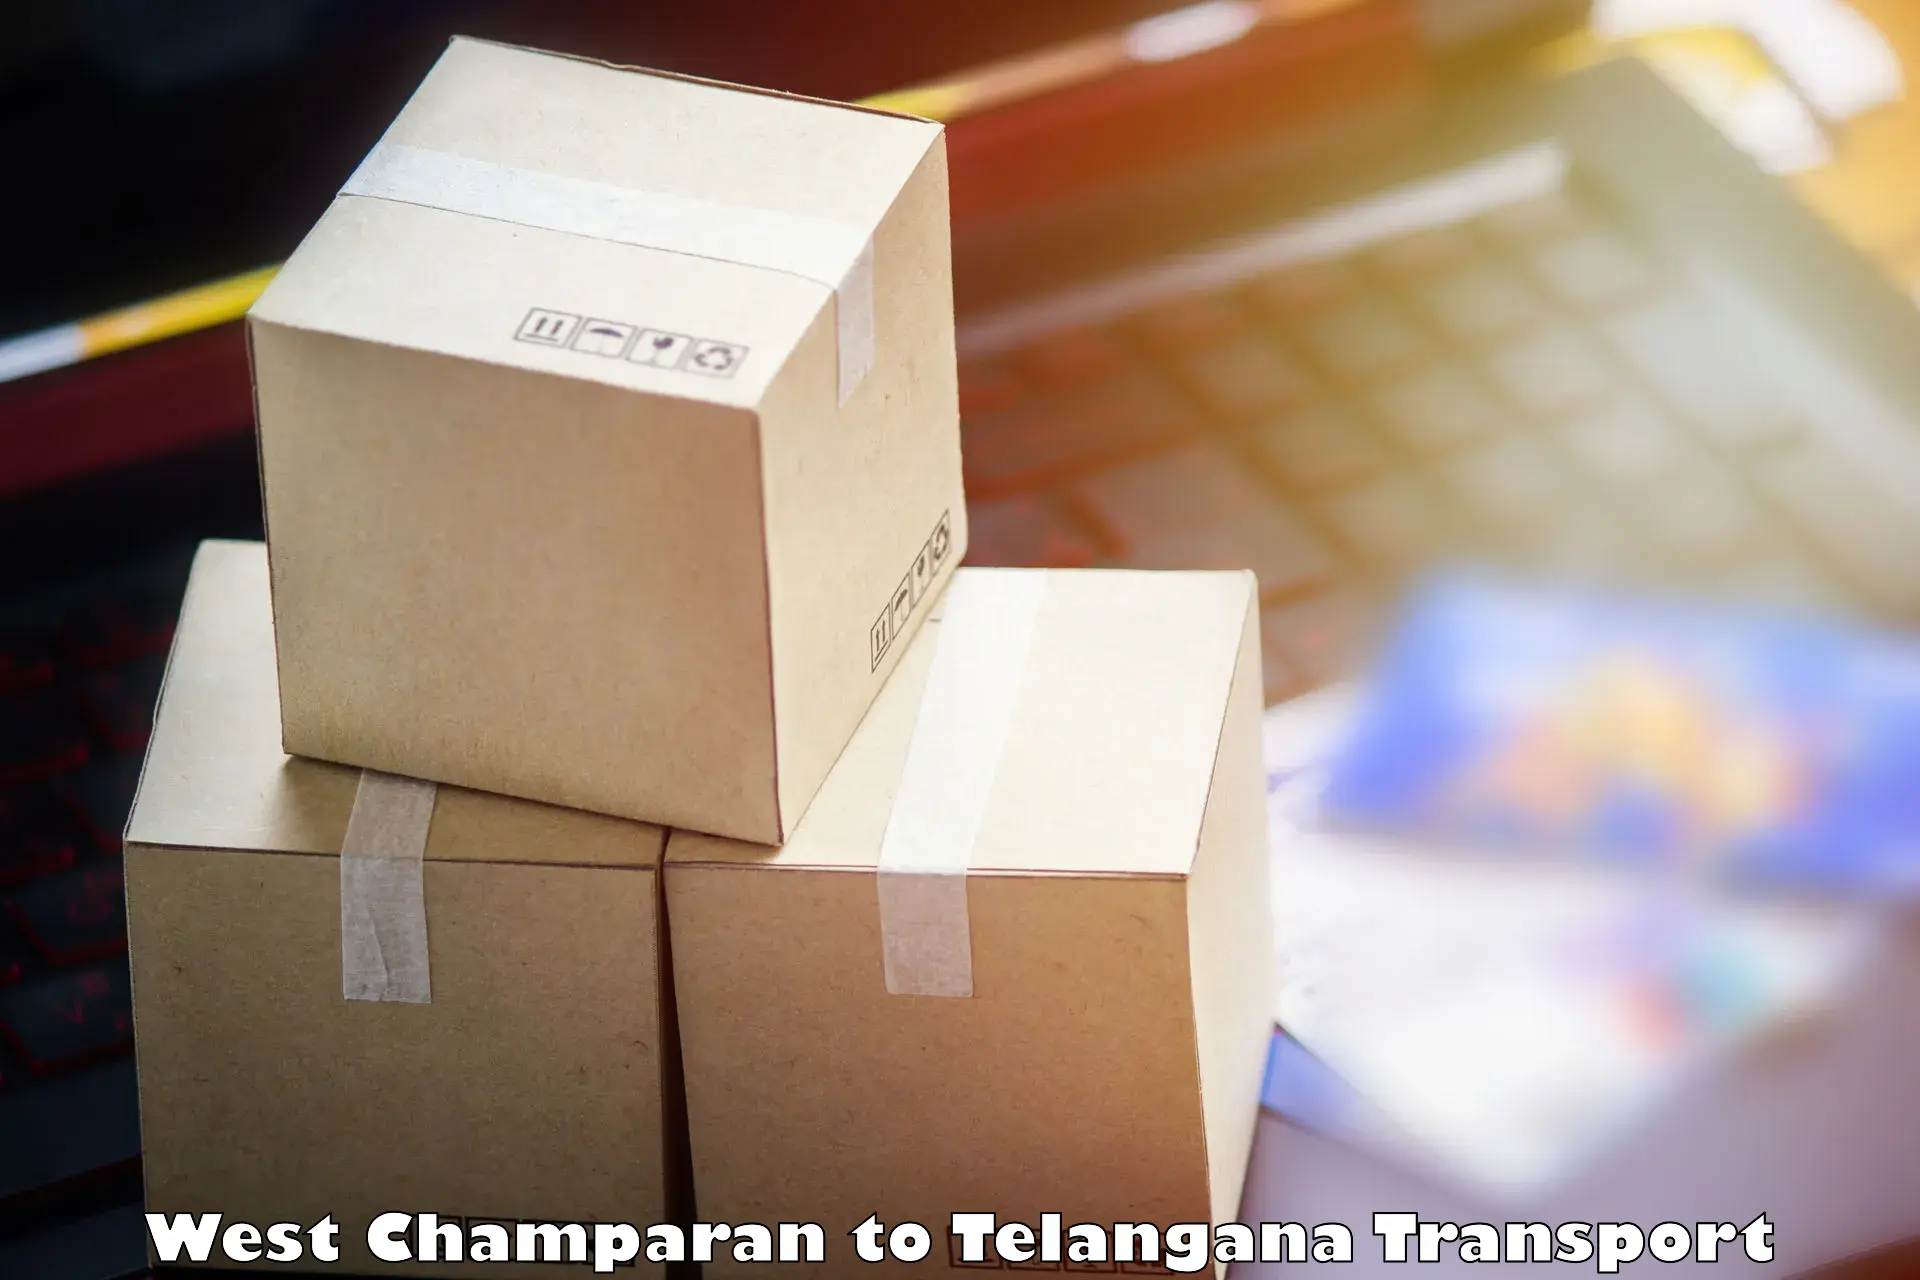 Online transport service West Champaran to Secunderabad